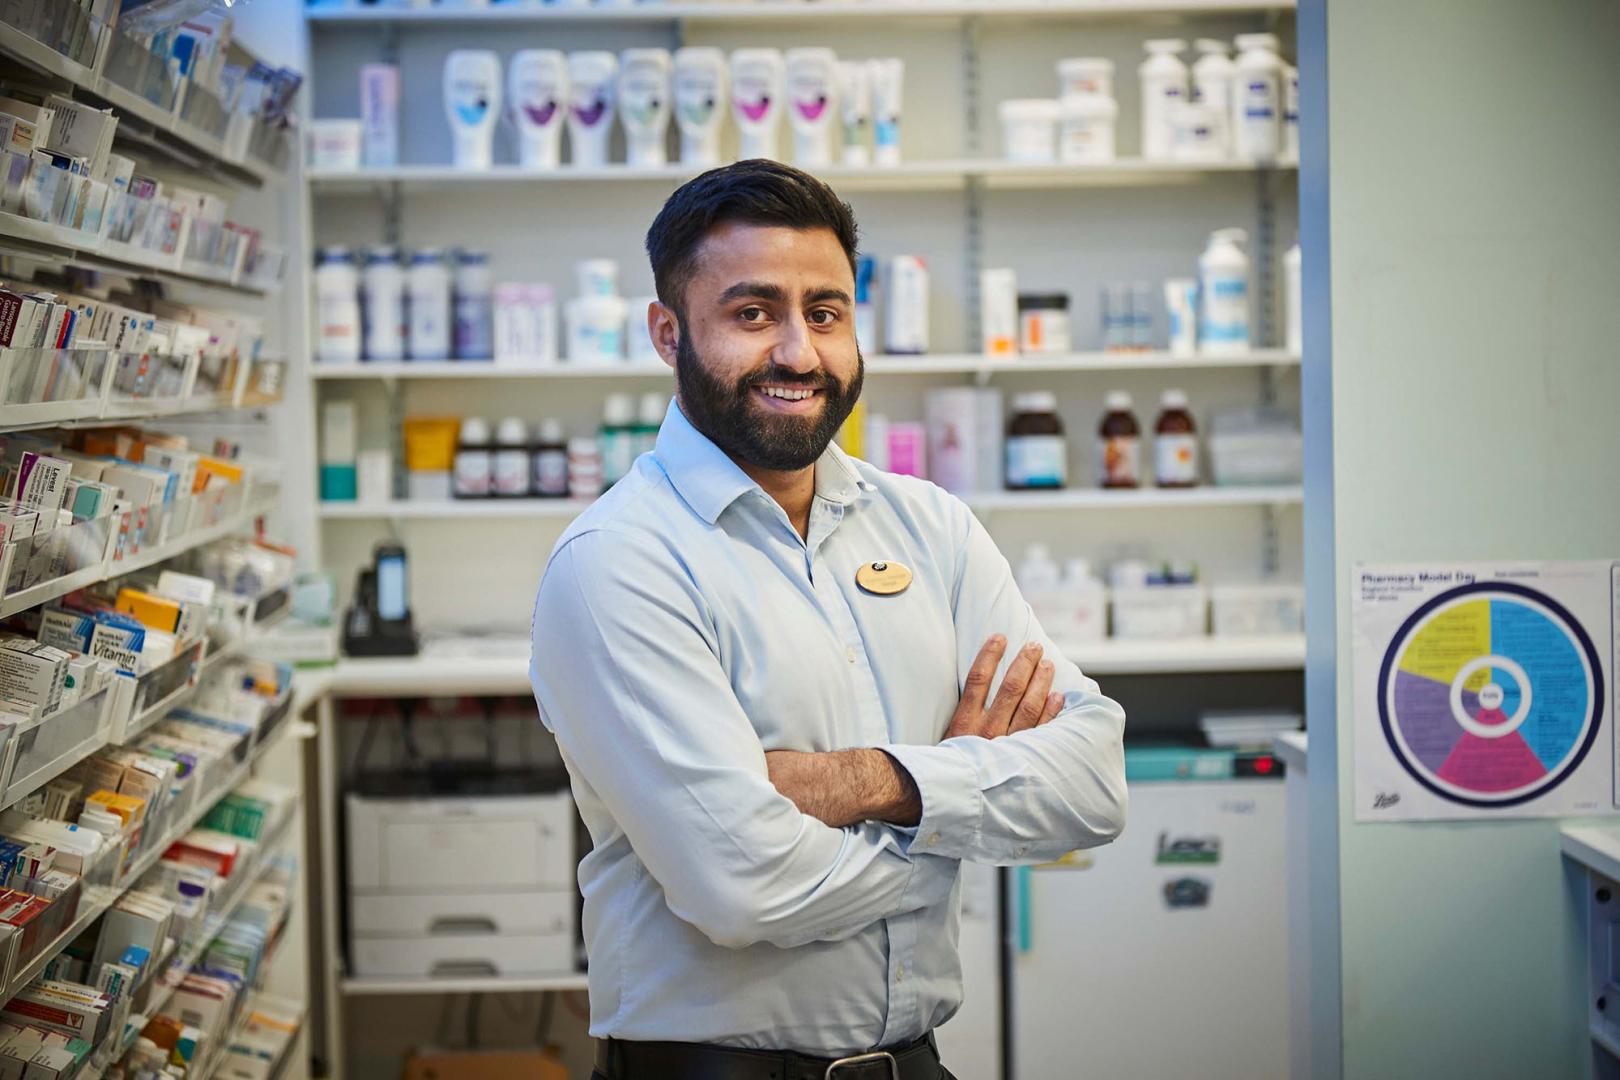 Boots UK team member in a pharmacy